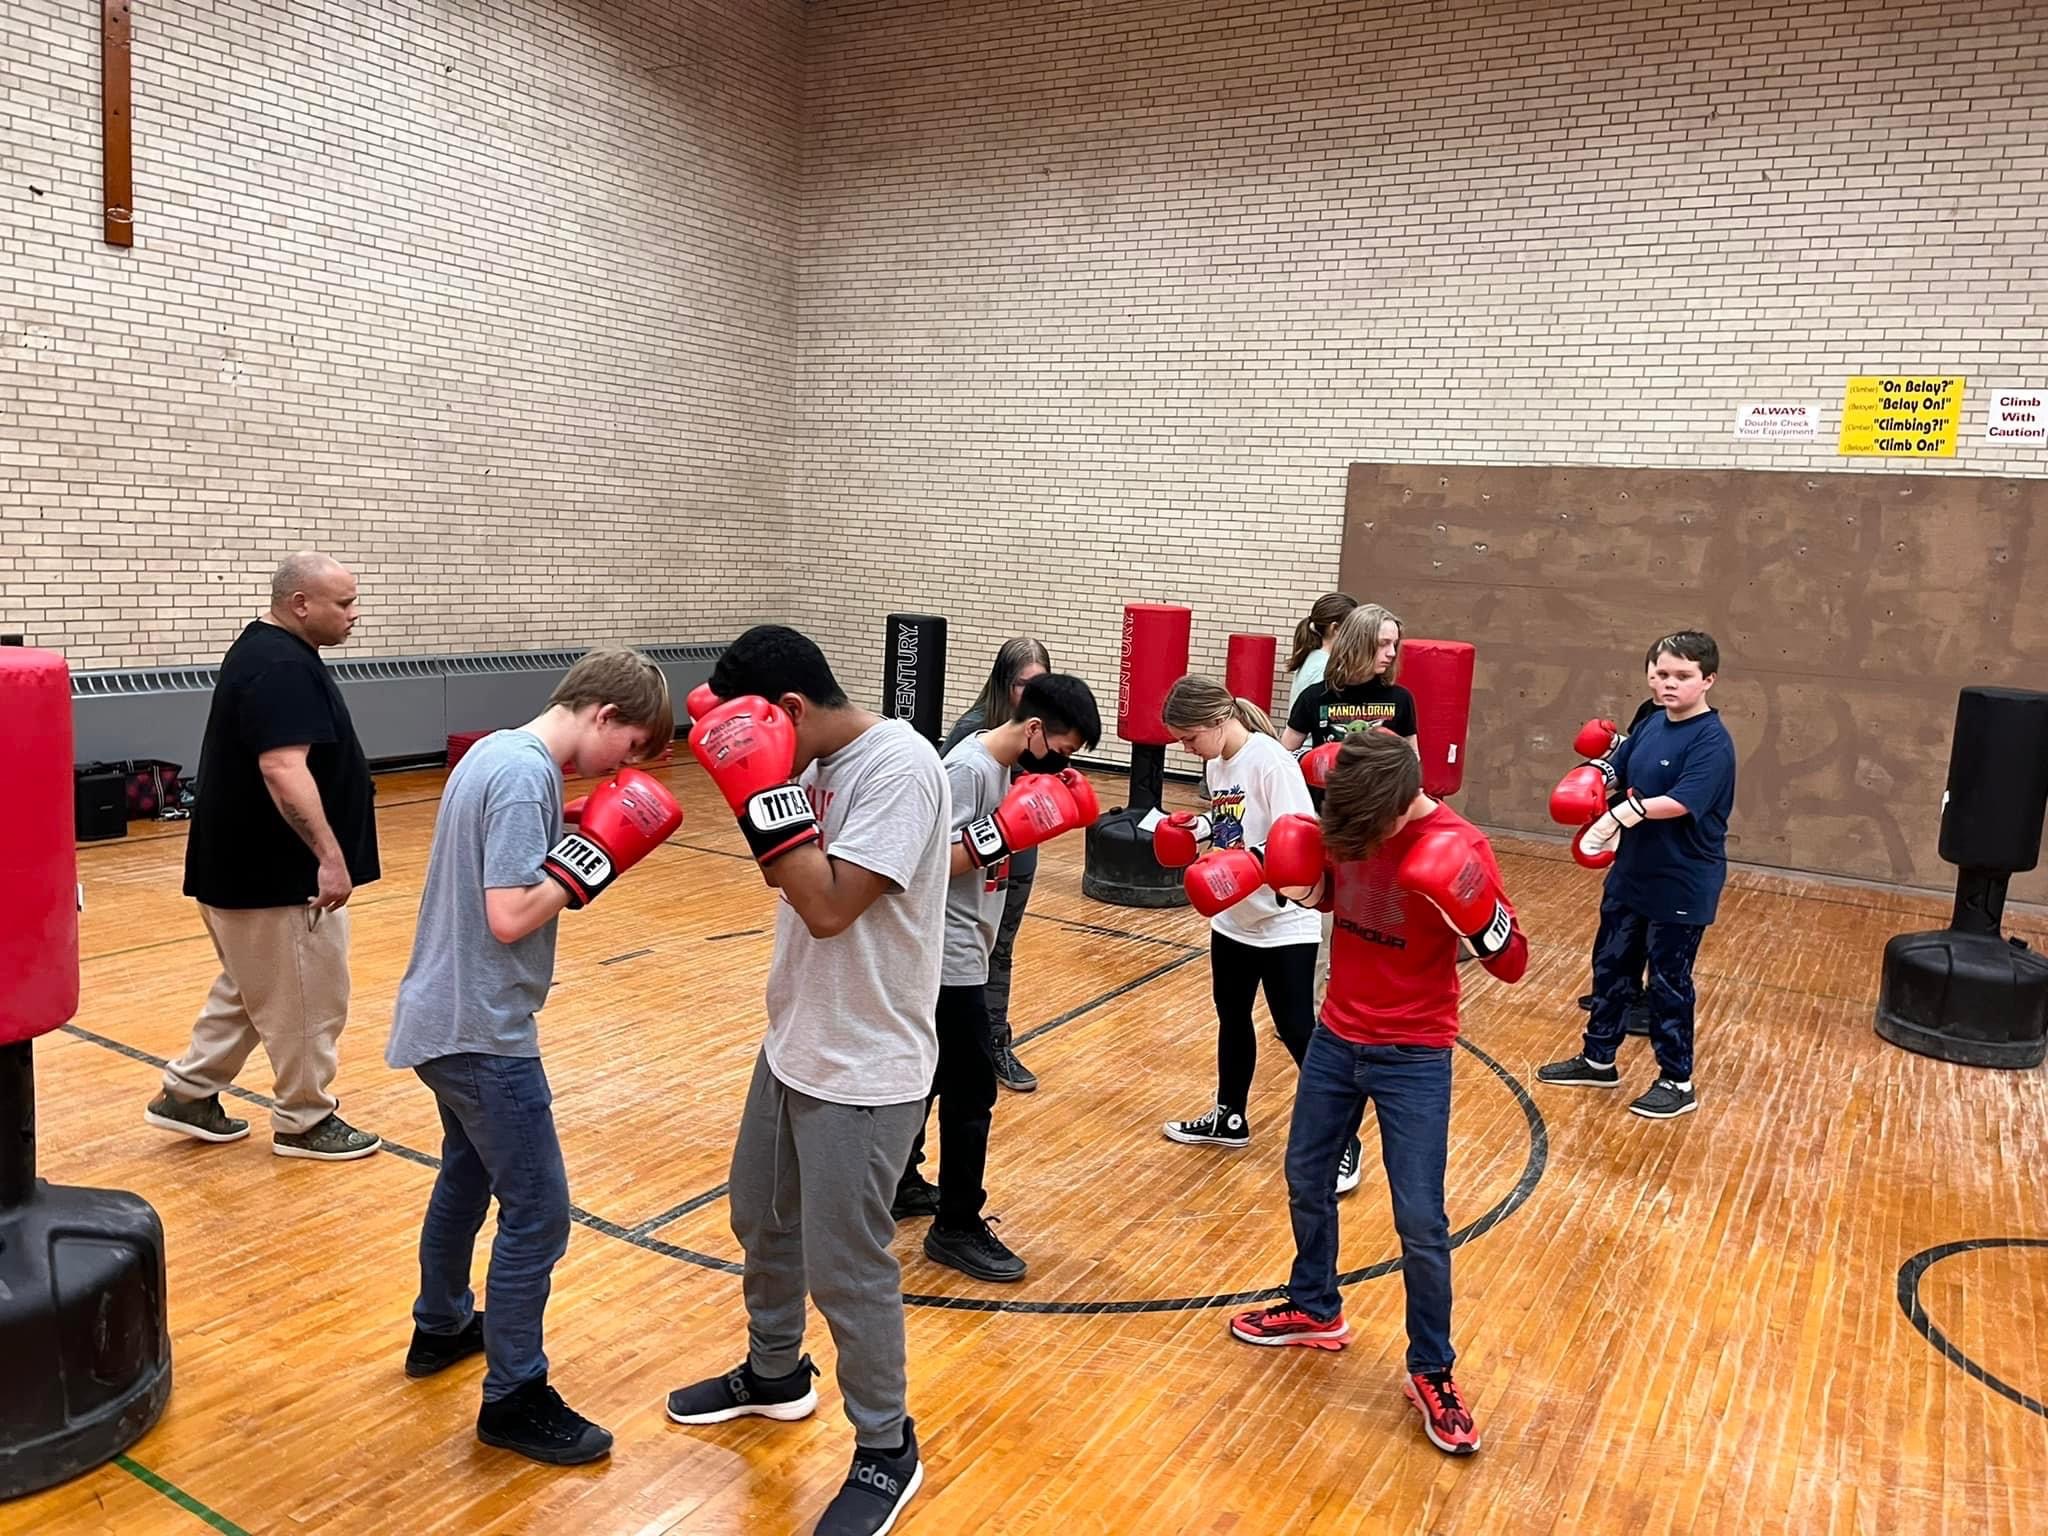 Children paired up in a gym with boxing gloves and punching bags.